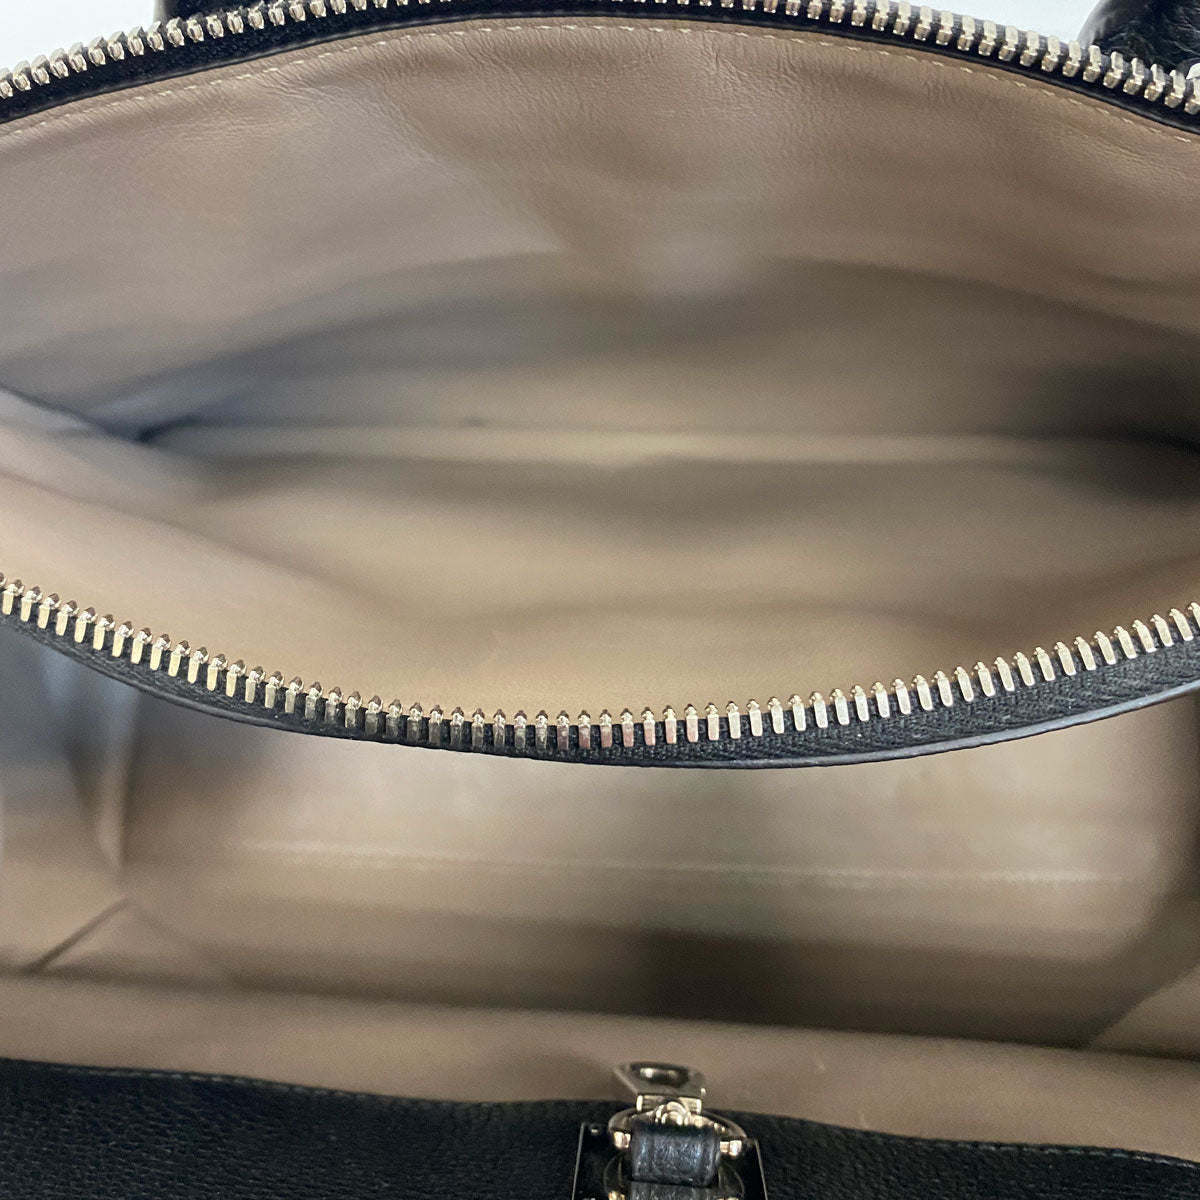 Louis Vuitton Galet Leather City Steamer Bag